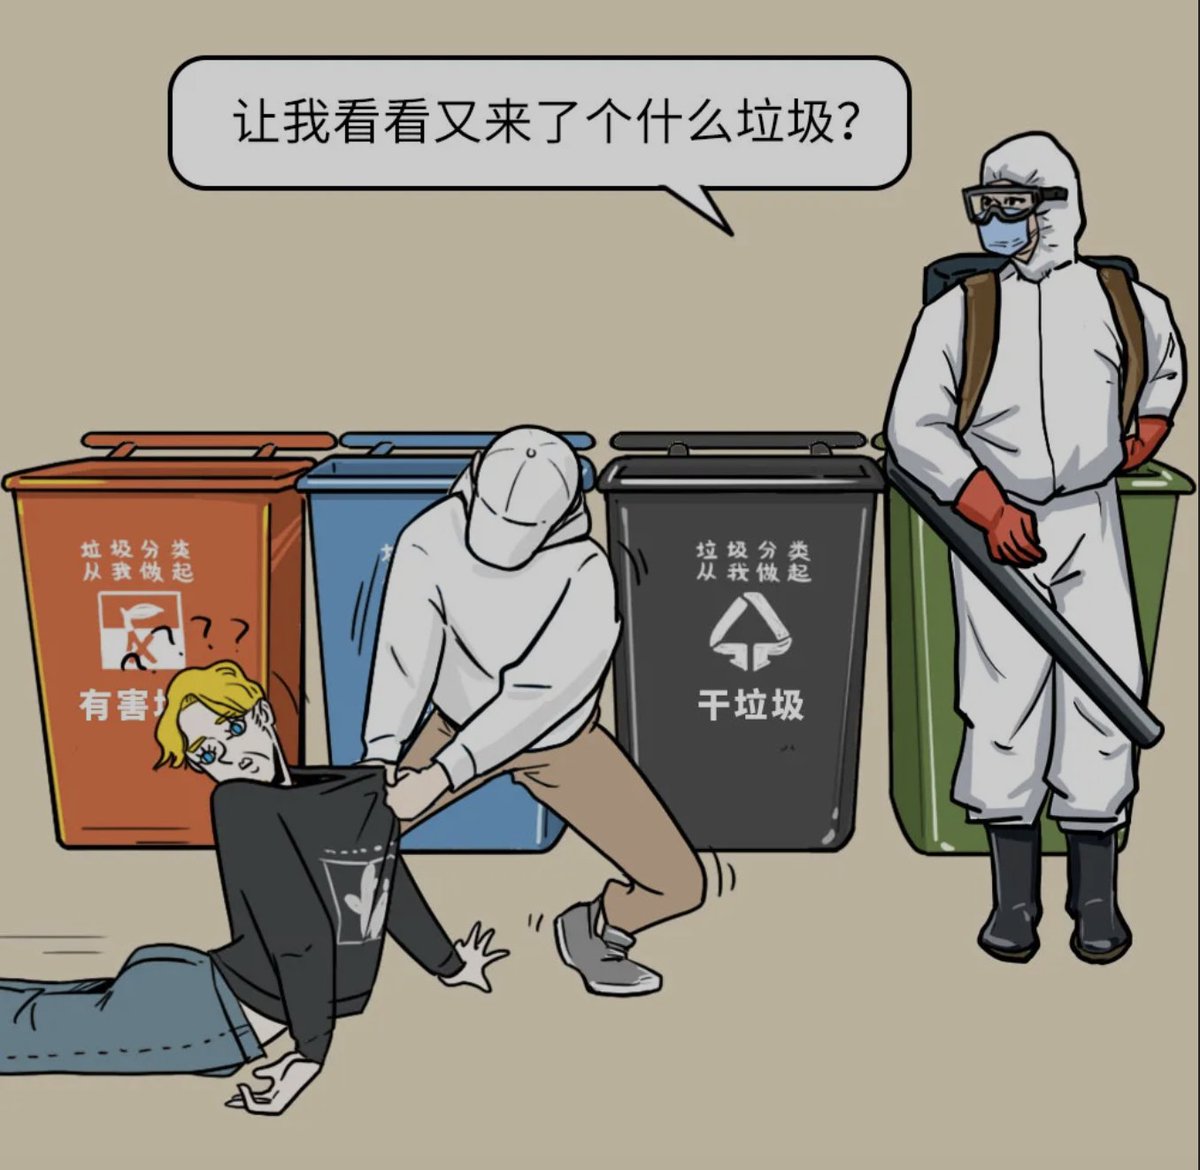 Another sign of soaring xenophobia in China. A cartoon imagines foreigners as trash to be sorted. It invents their crimes against the virus response, mixes it with their malign motives in China, and fantasizes about committing violence against them.  https://mp.weixin.qq.com/s/BiOzO4snKit4kGhnw3r5DA